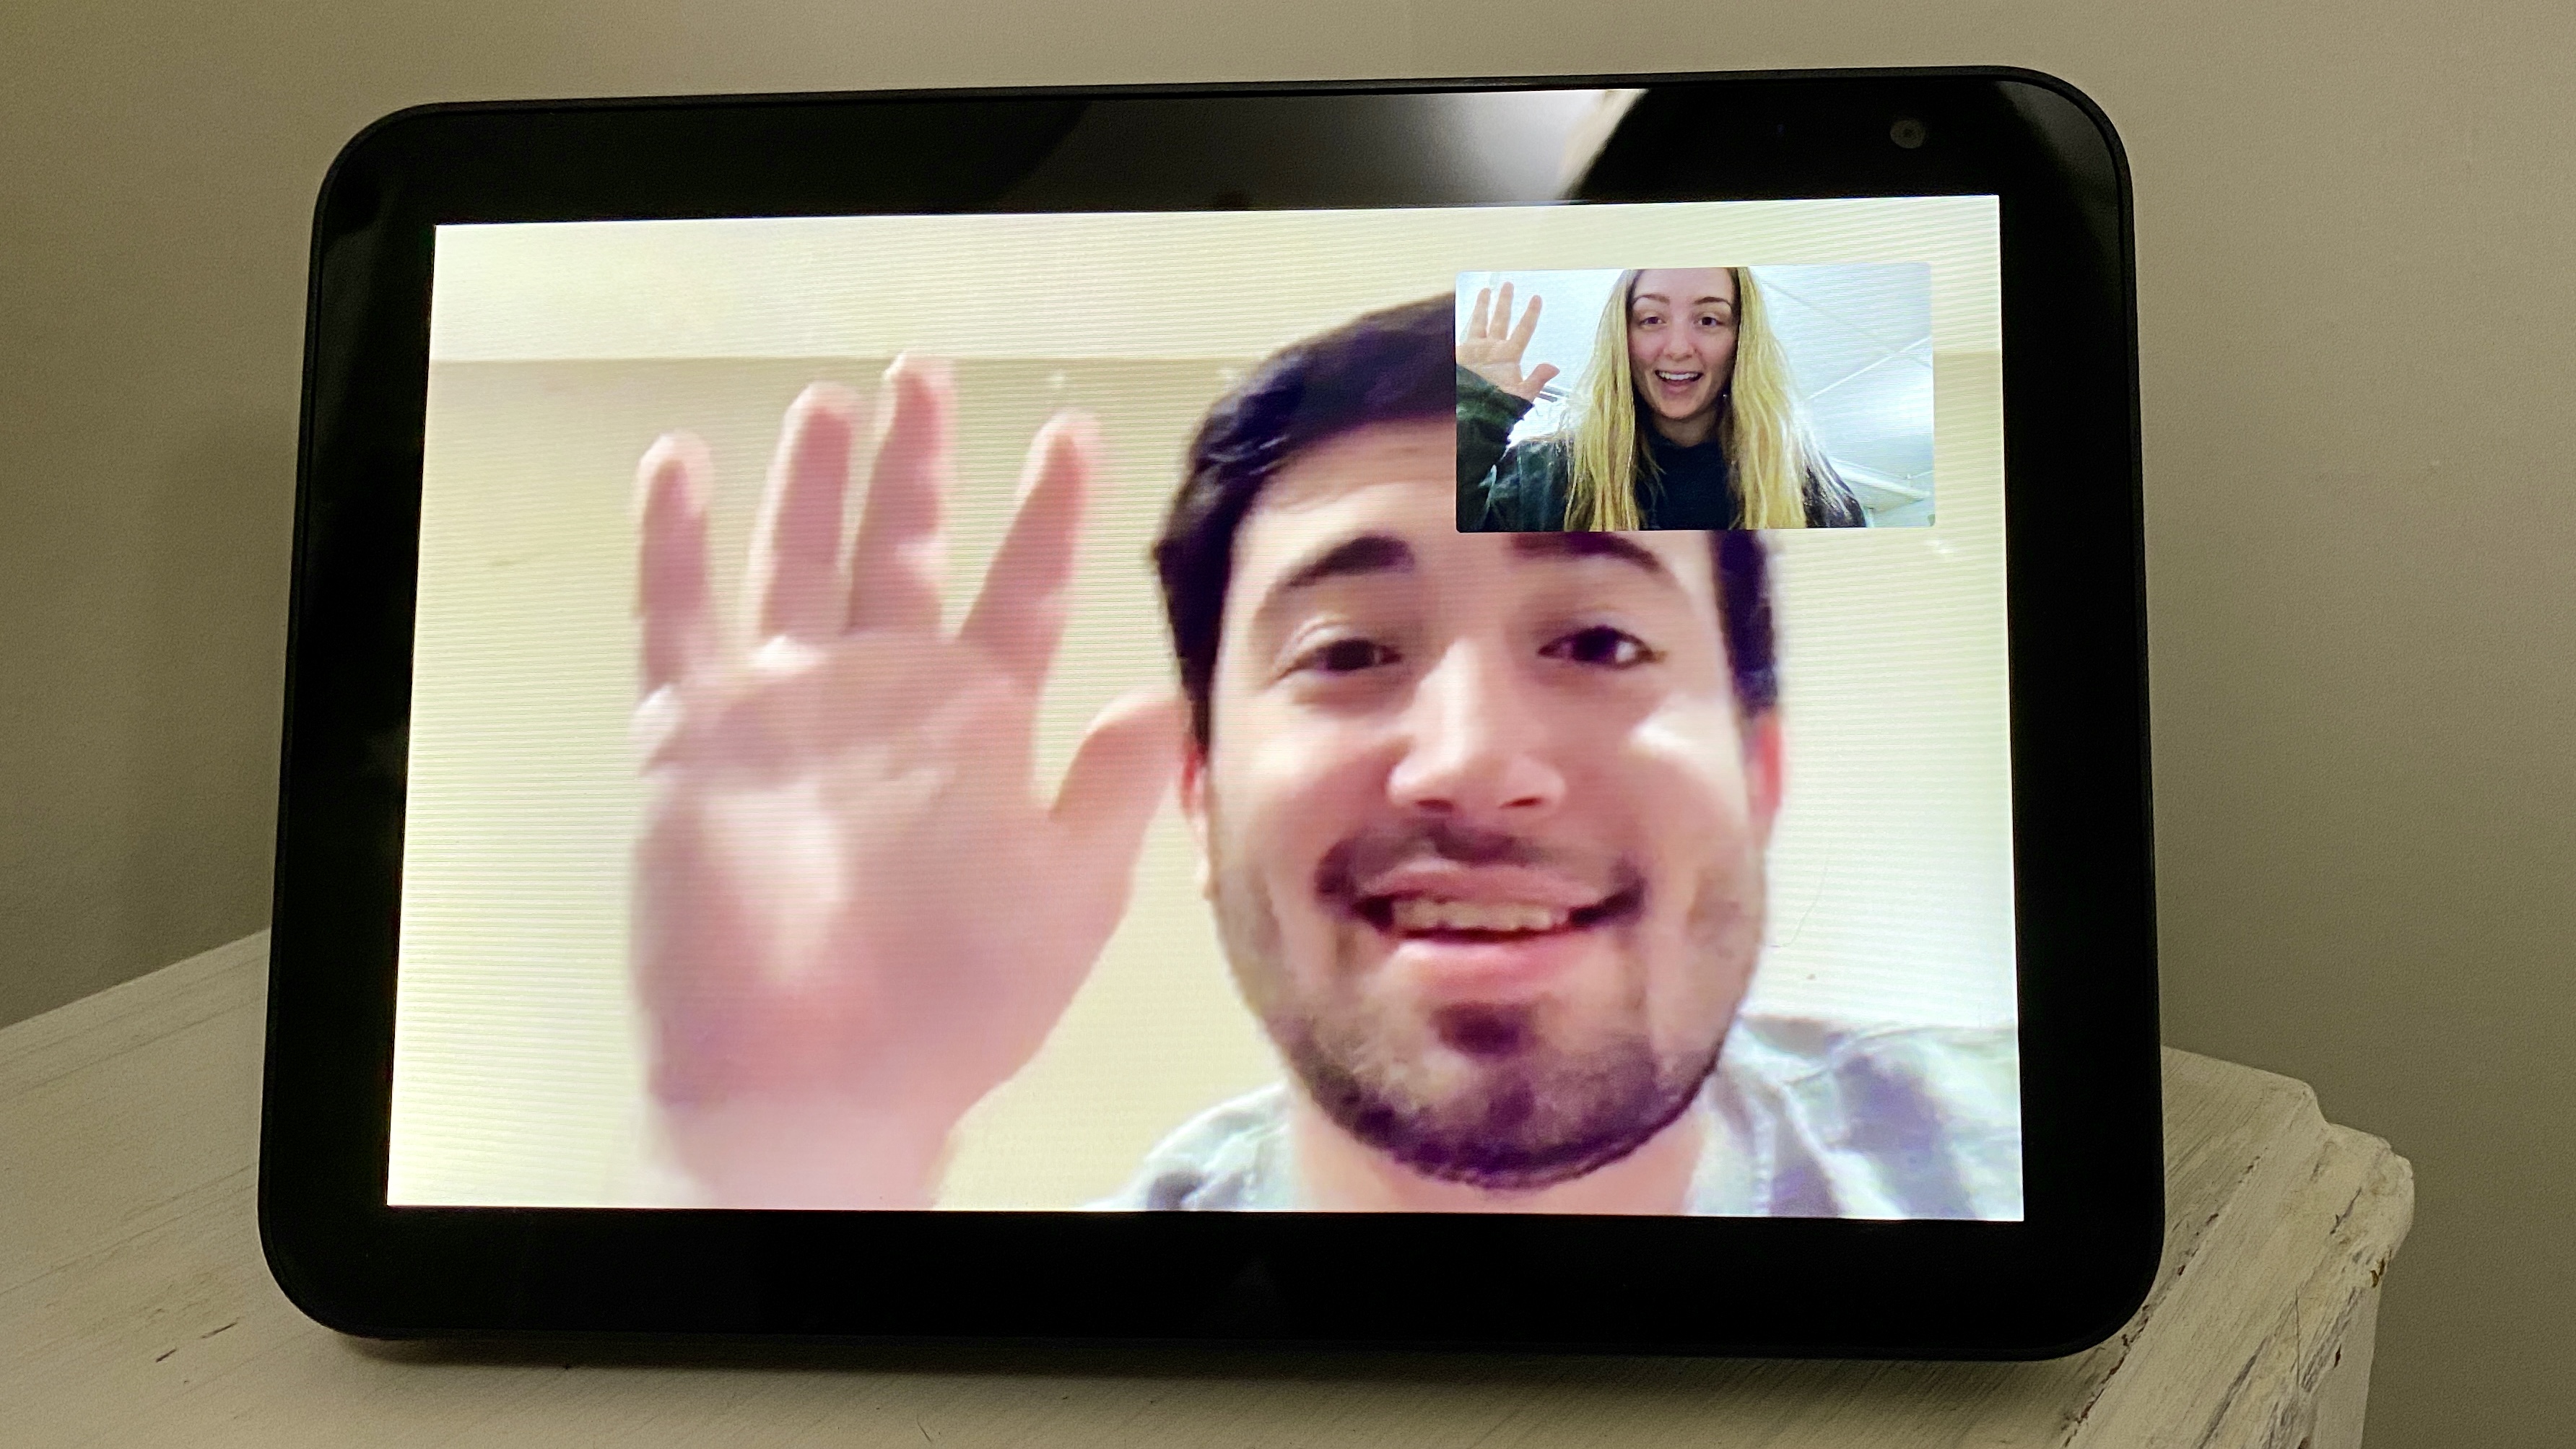 How to make a video call using the Echo Show